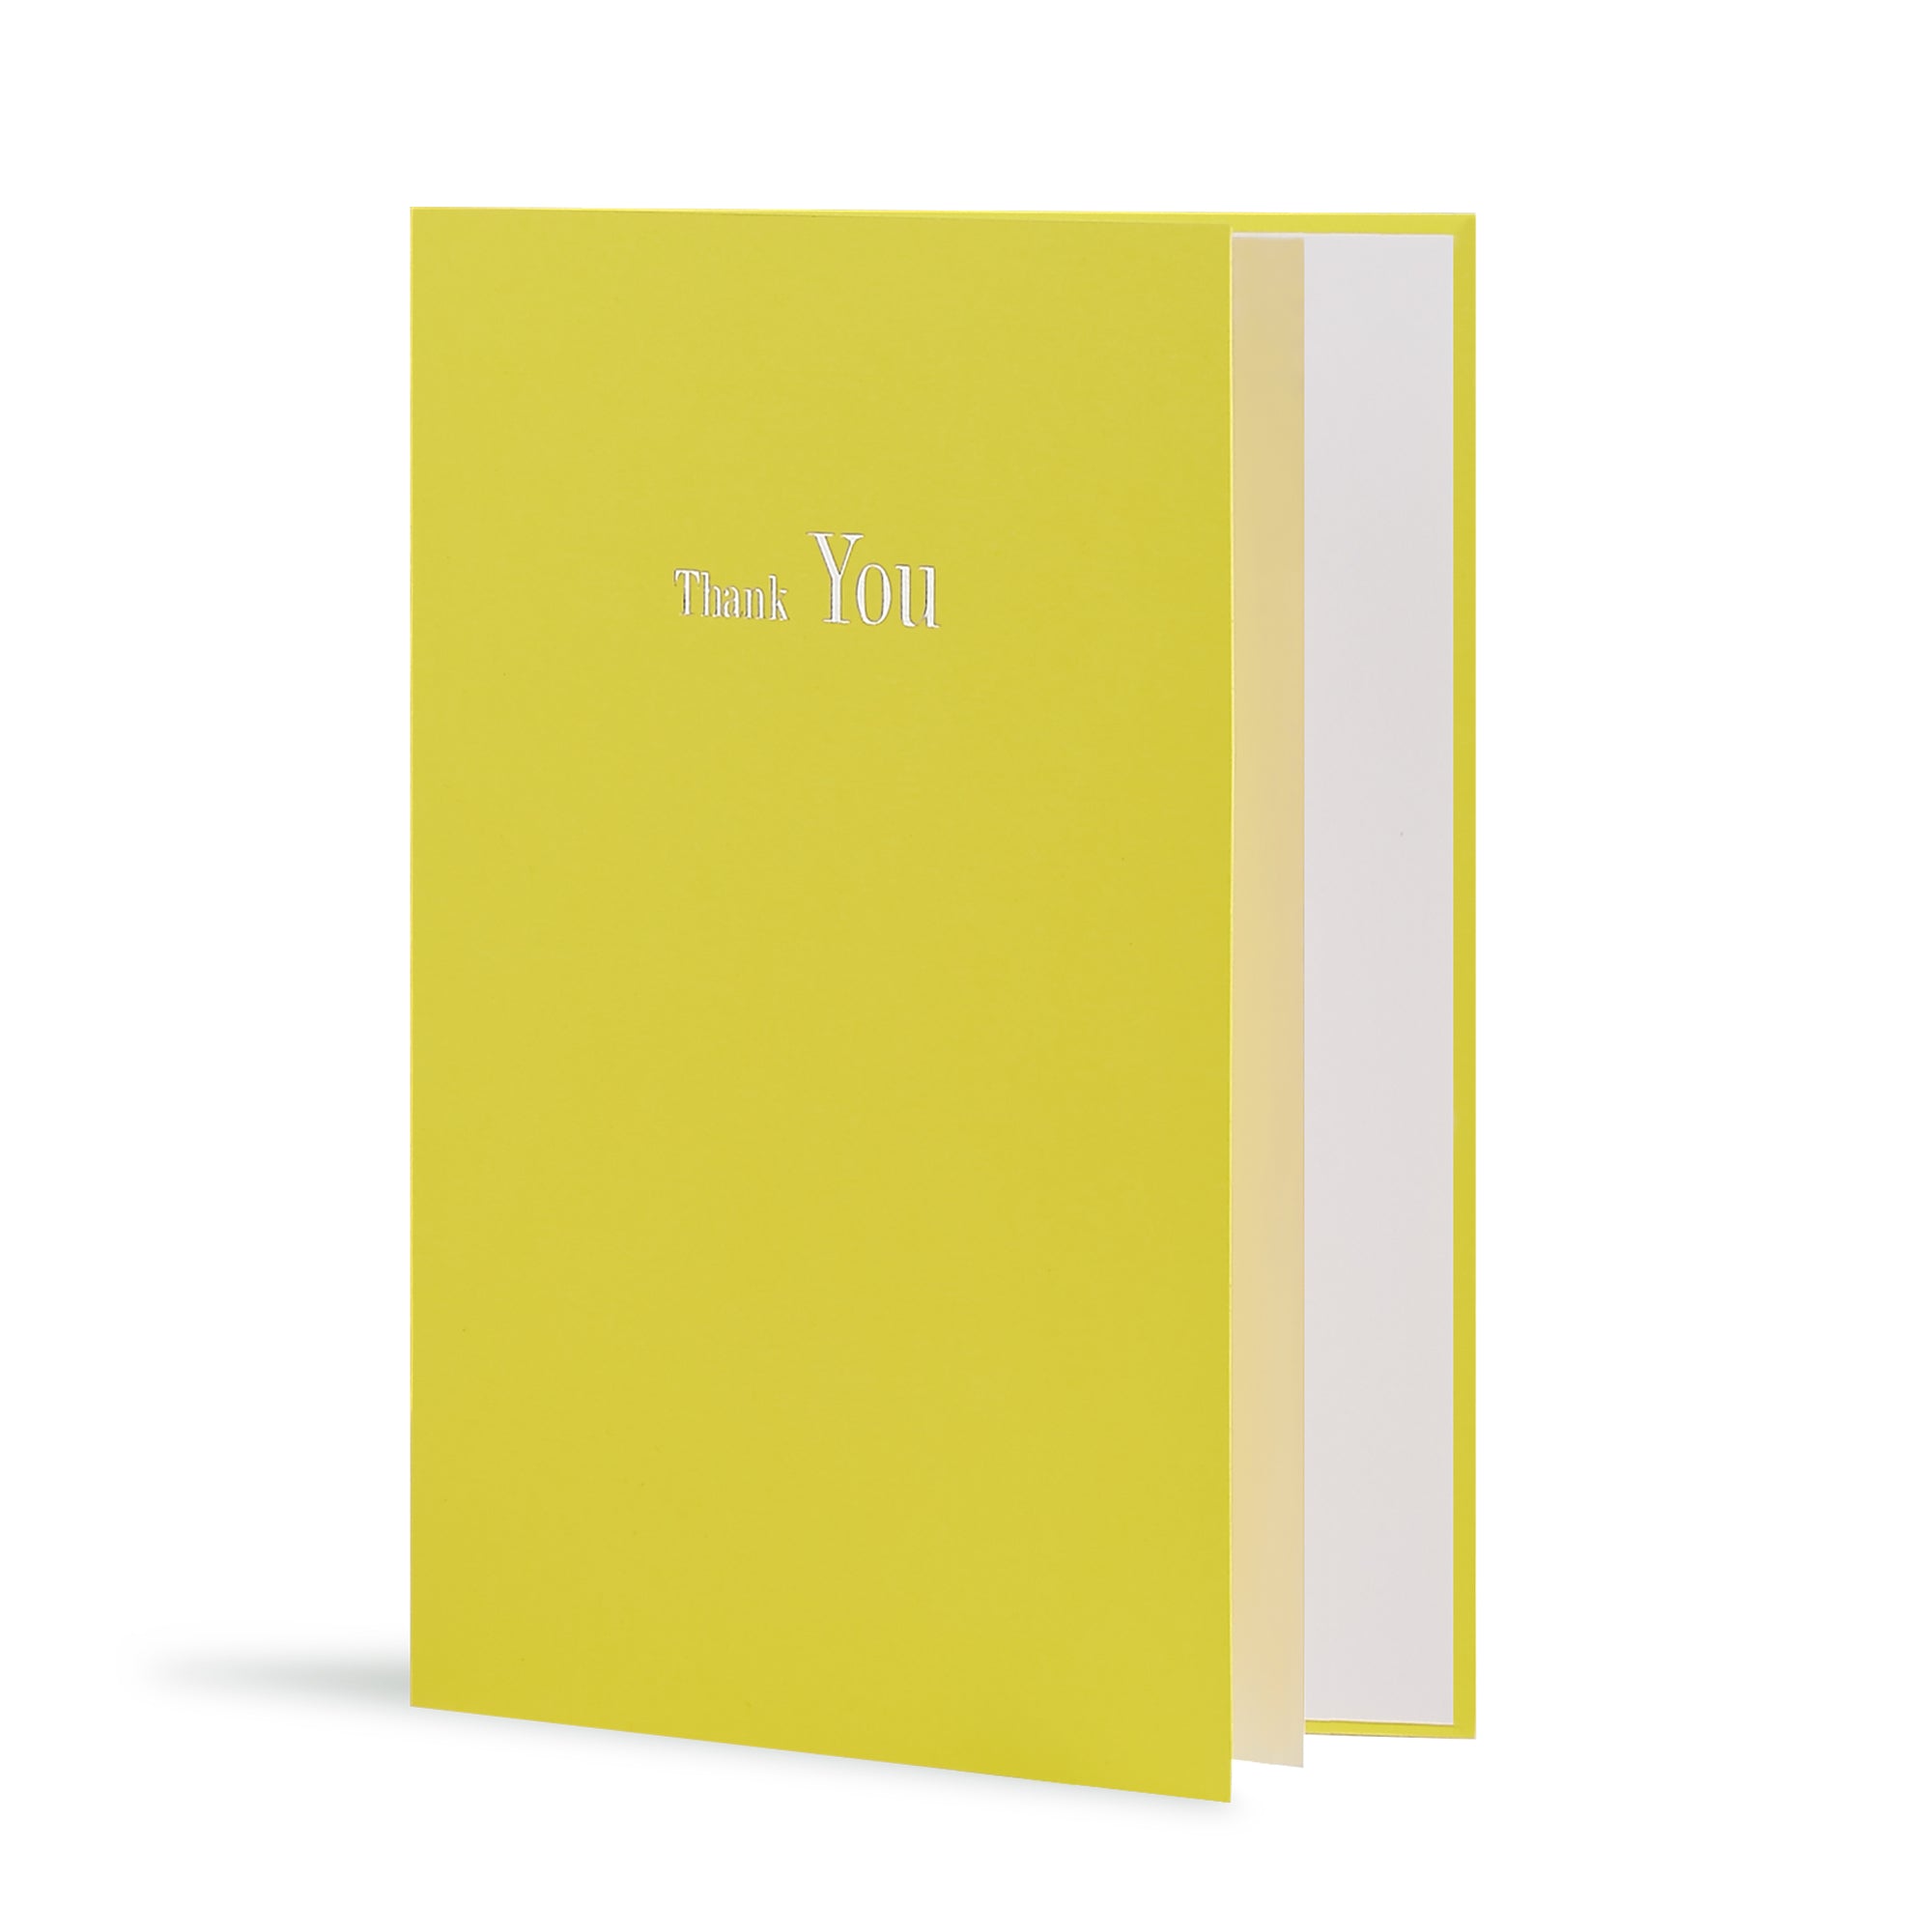 Thank You Greeting Card in Yellow, Side